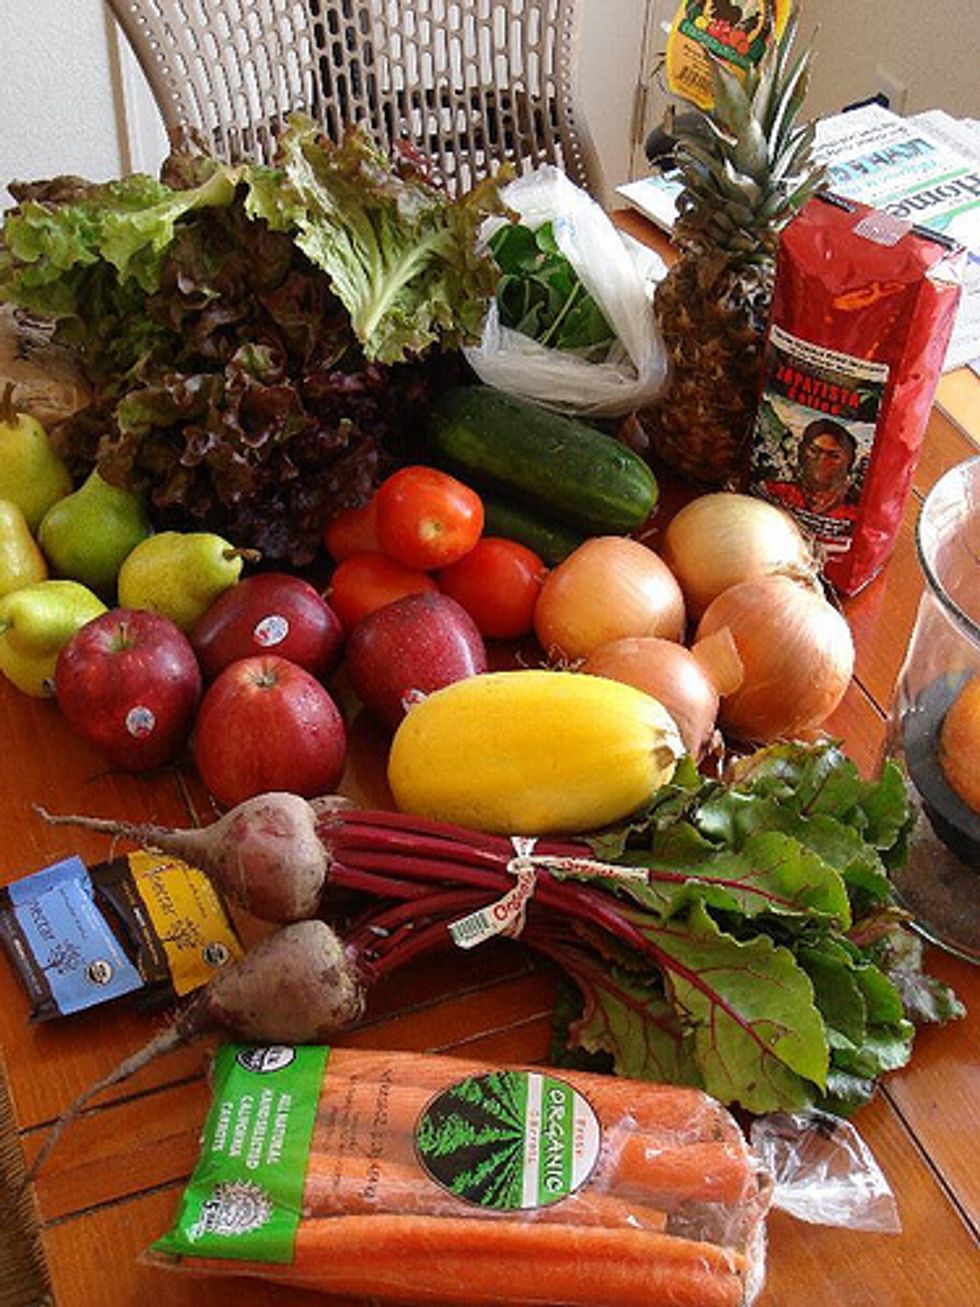 Score A Huge Deal On Produce From Local Organic CSA Farm Fresh To You